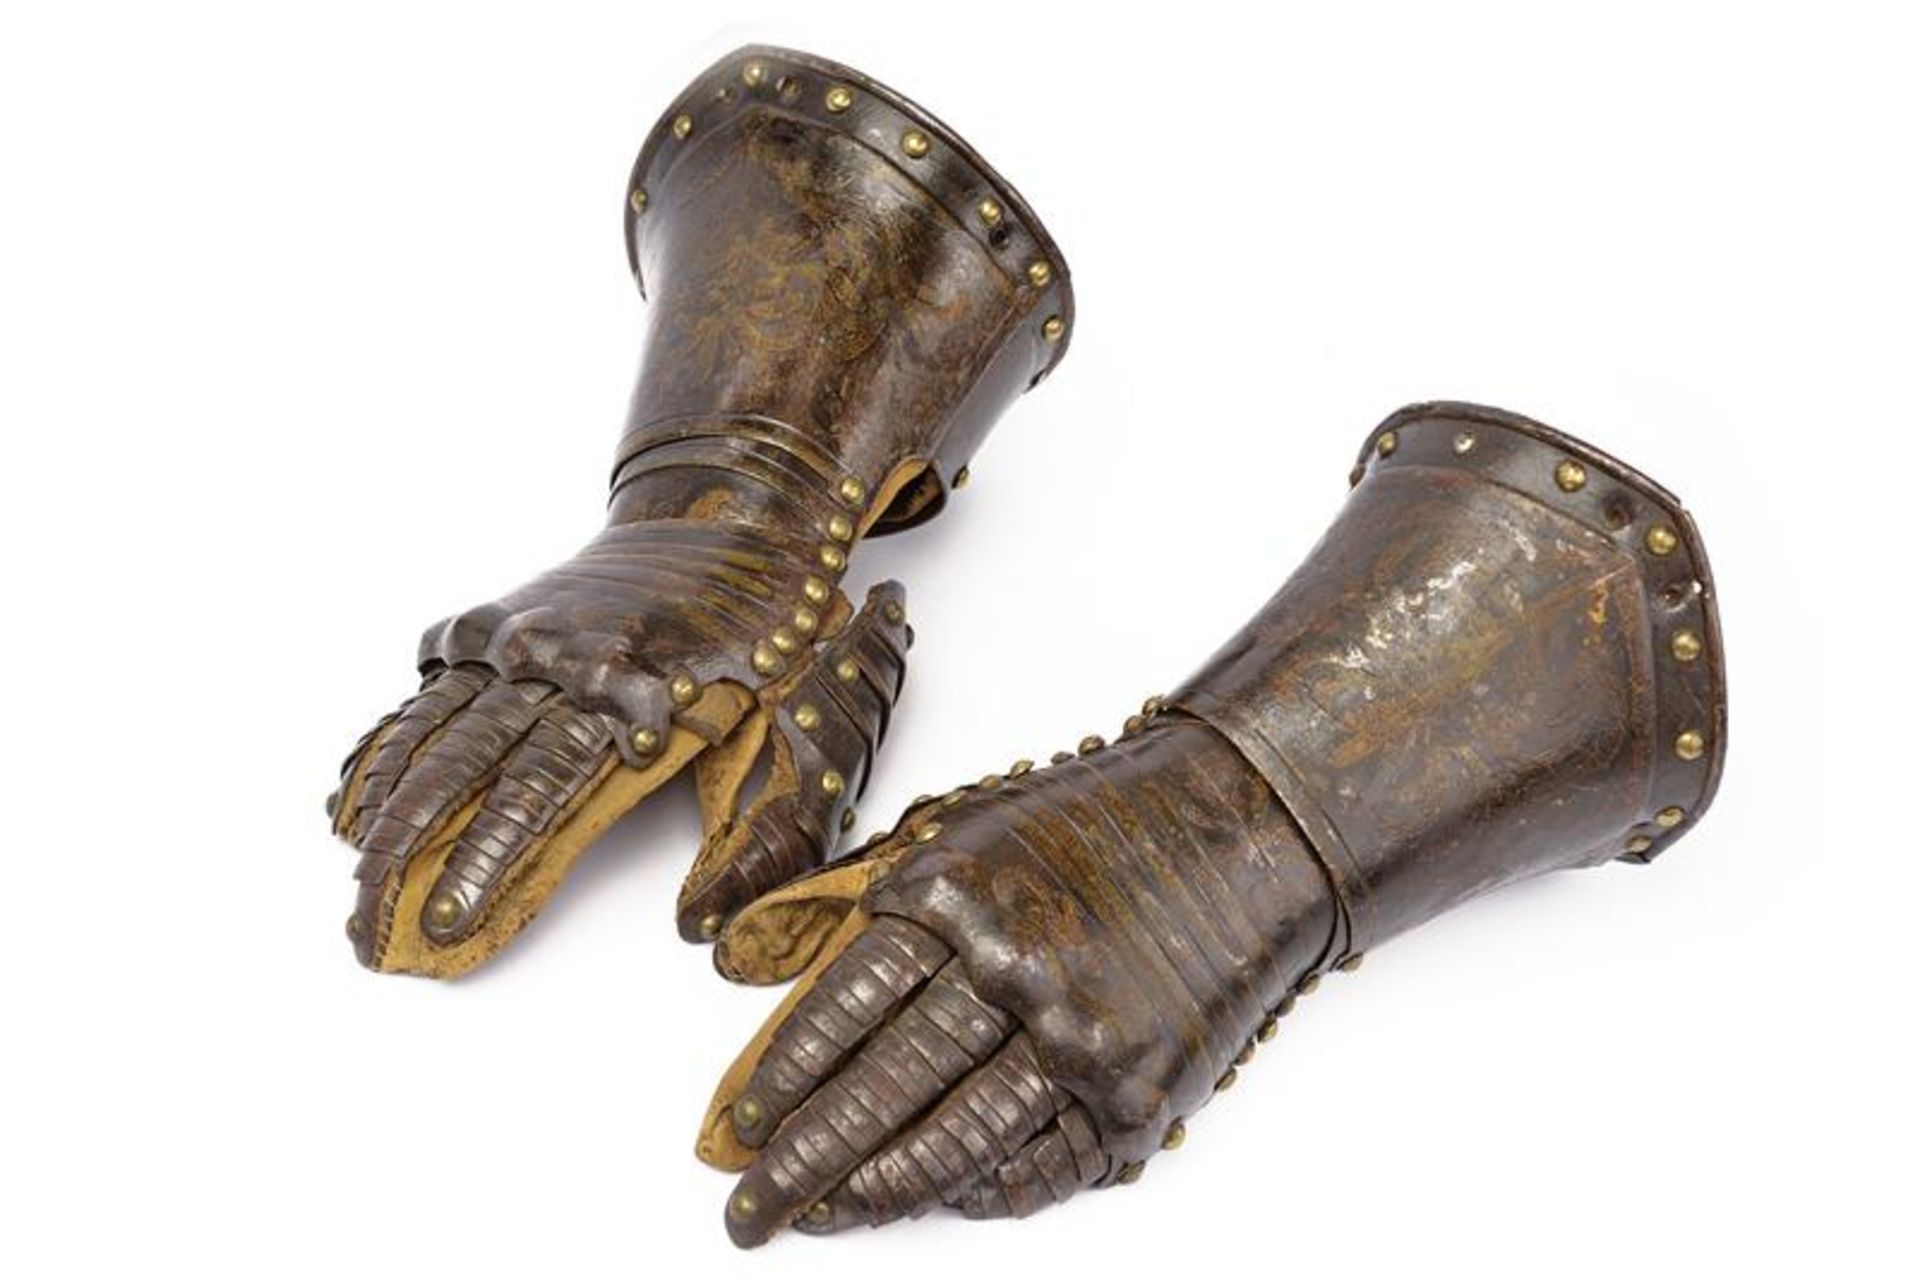 A fine pair of painted gauntlets